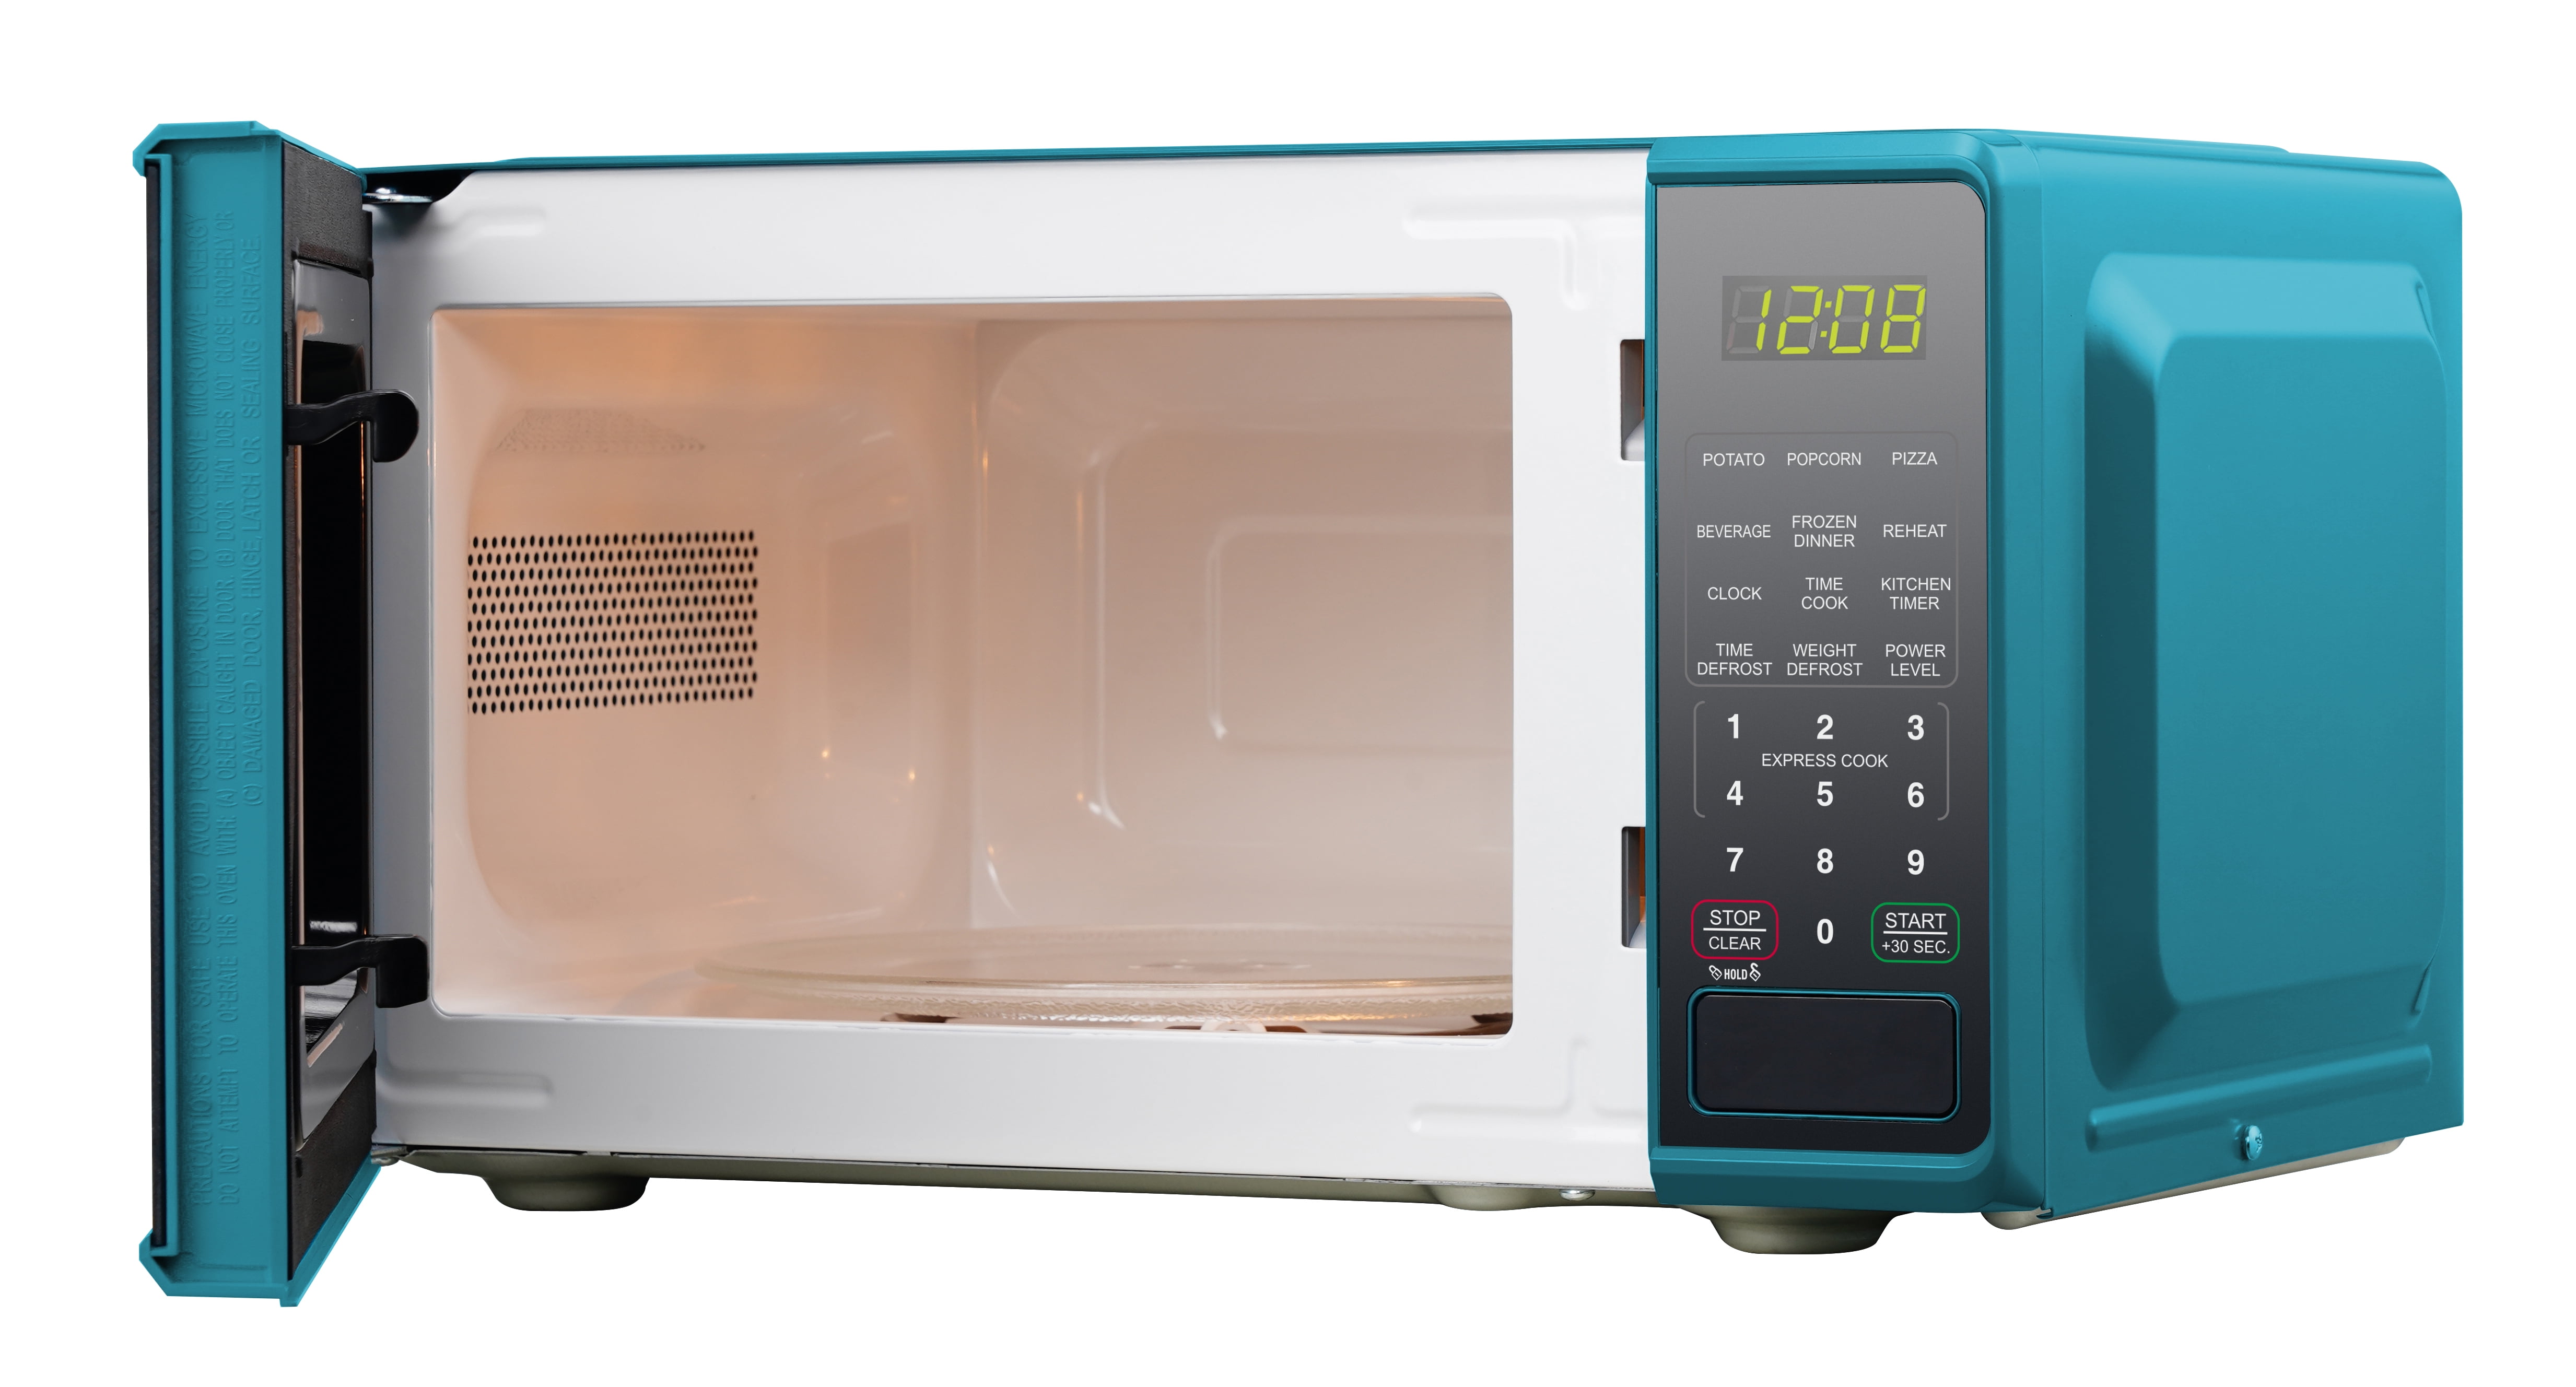 Mainstays 0.7 cu. ft. Countertop Microwave Oven, 700 Watts, Red, New